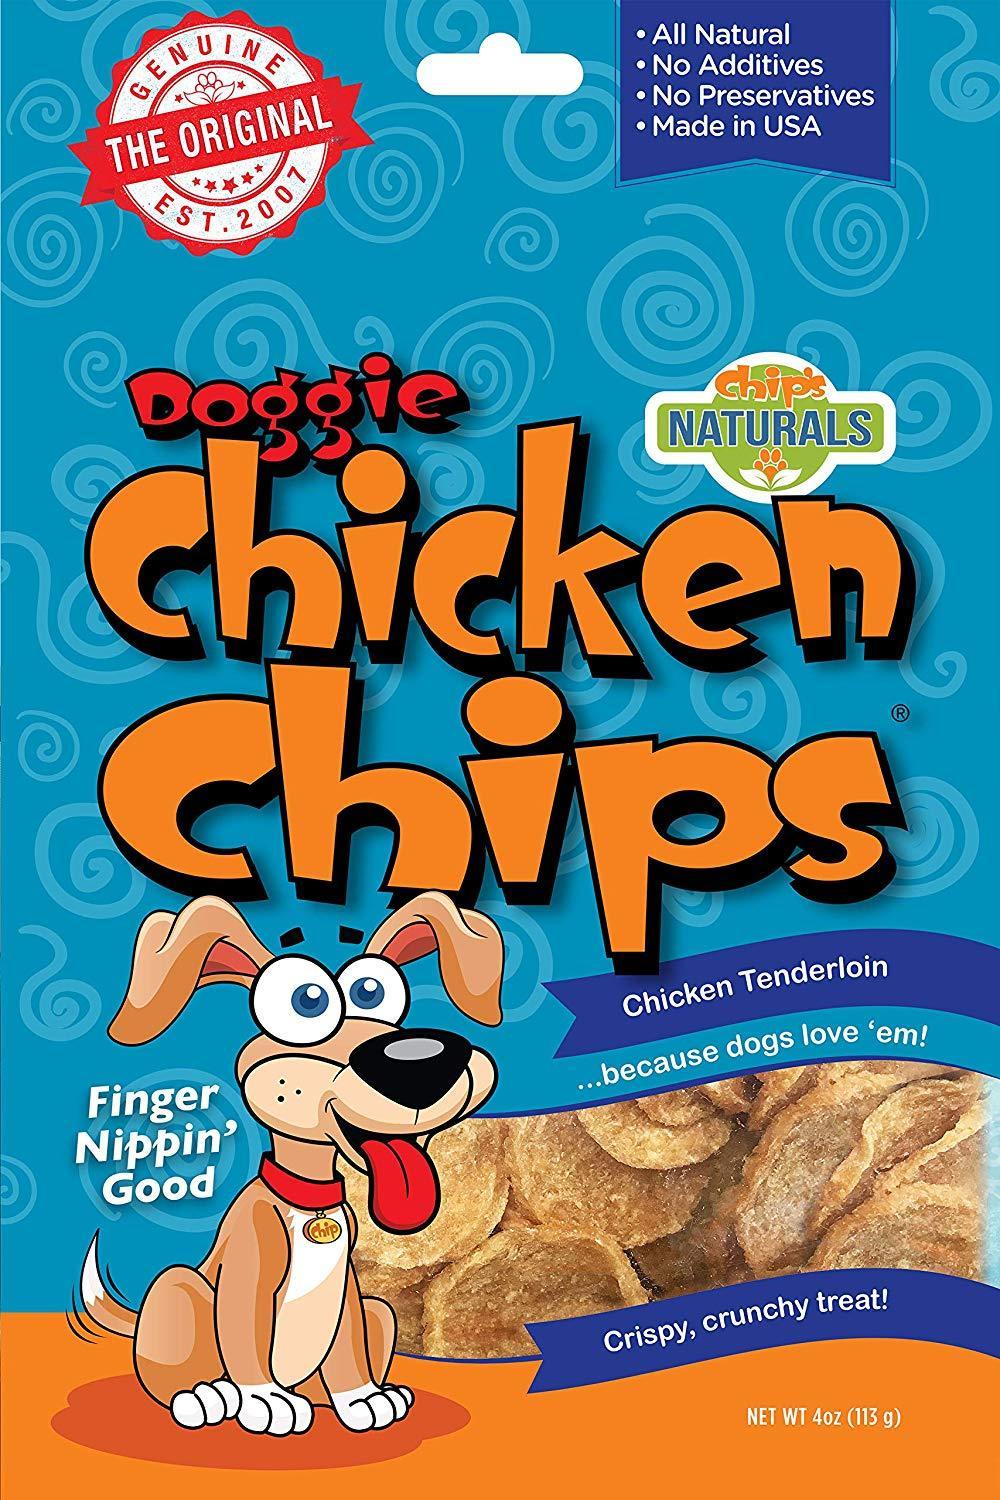 Chip's Naturals Doggie Chicken Chips Treats for Dogs, 4 oz